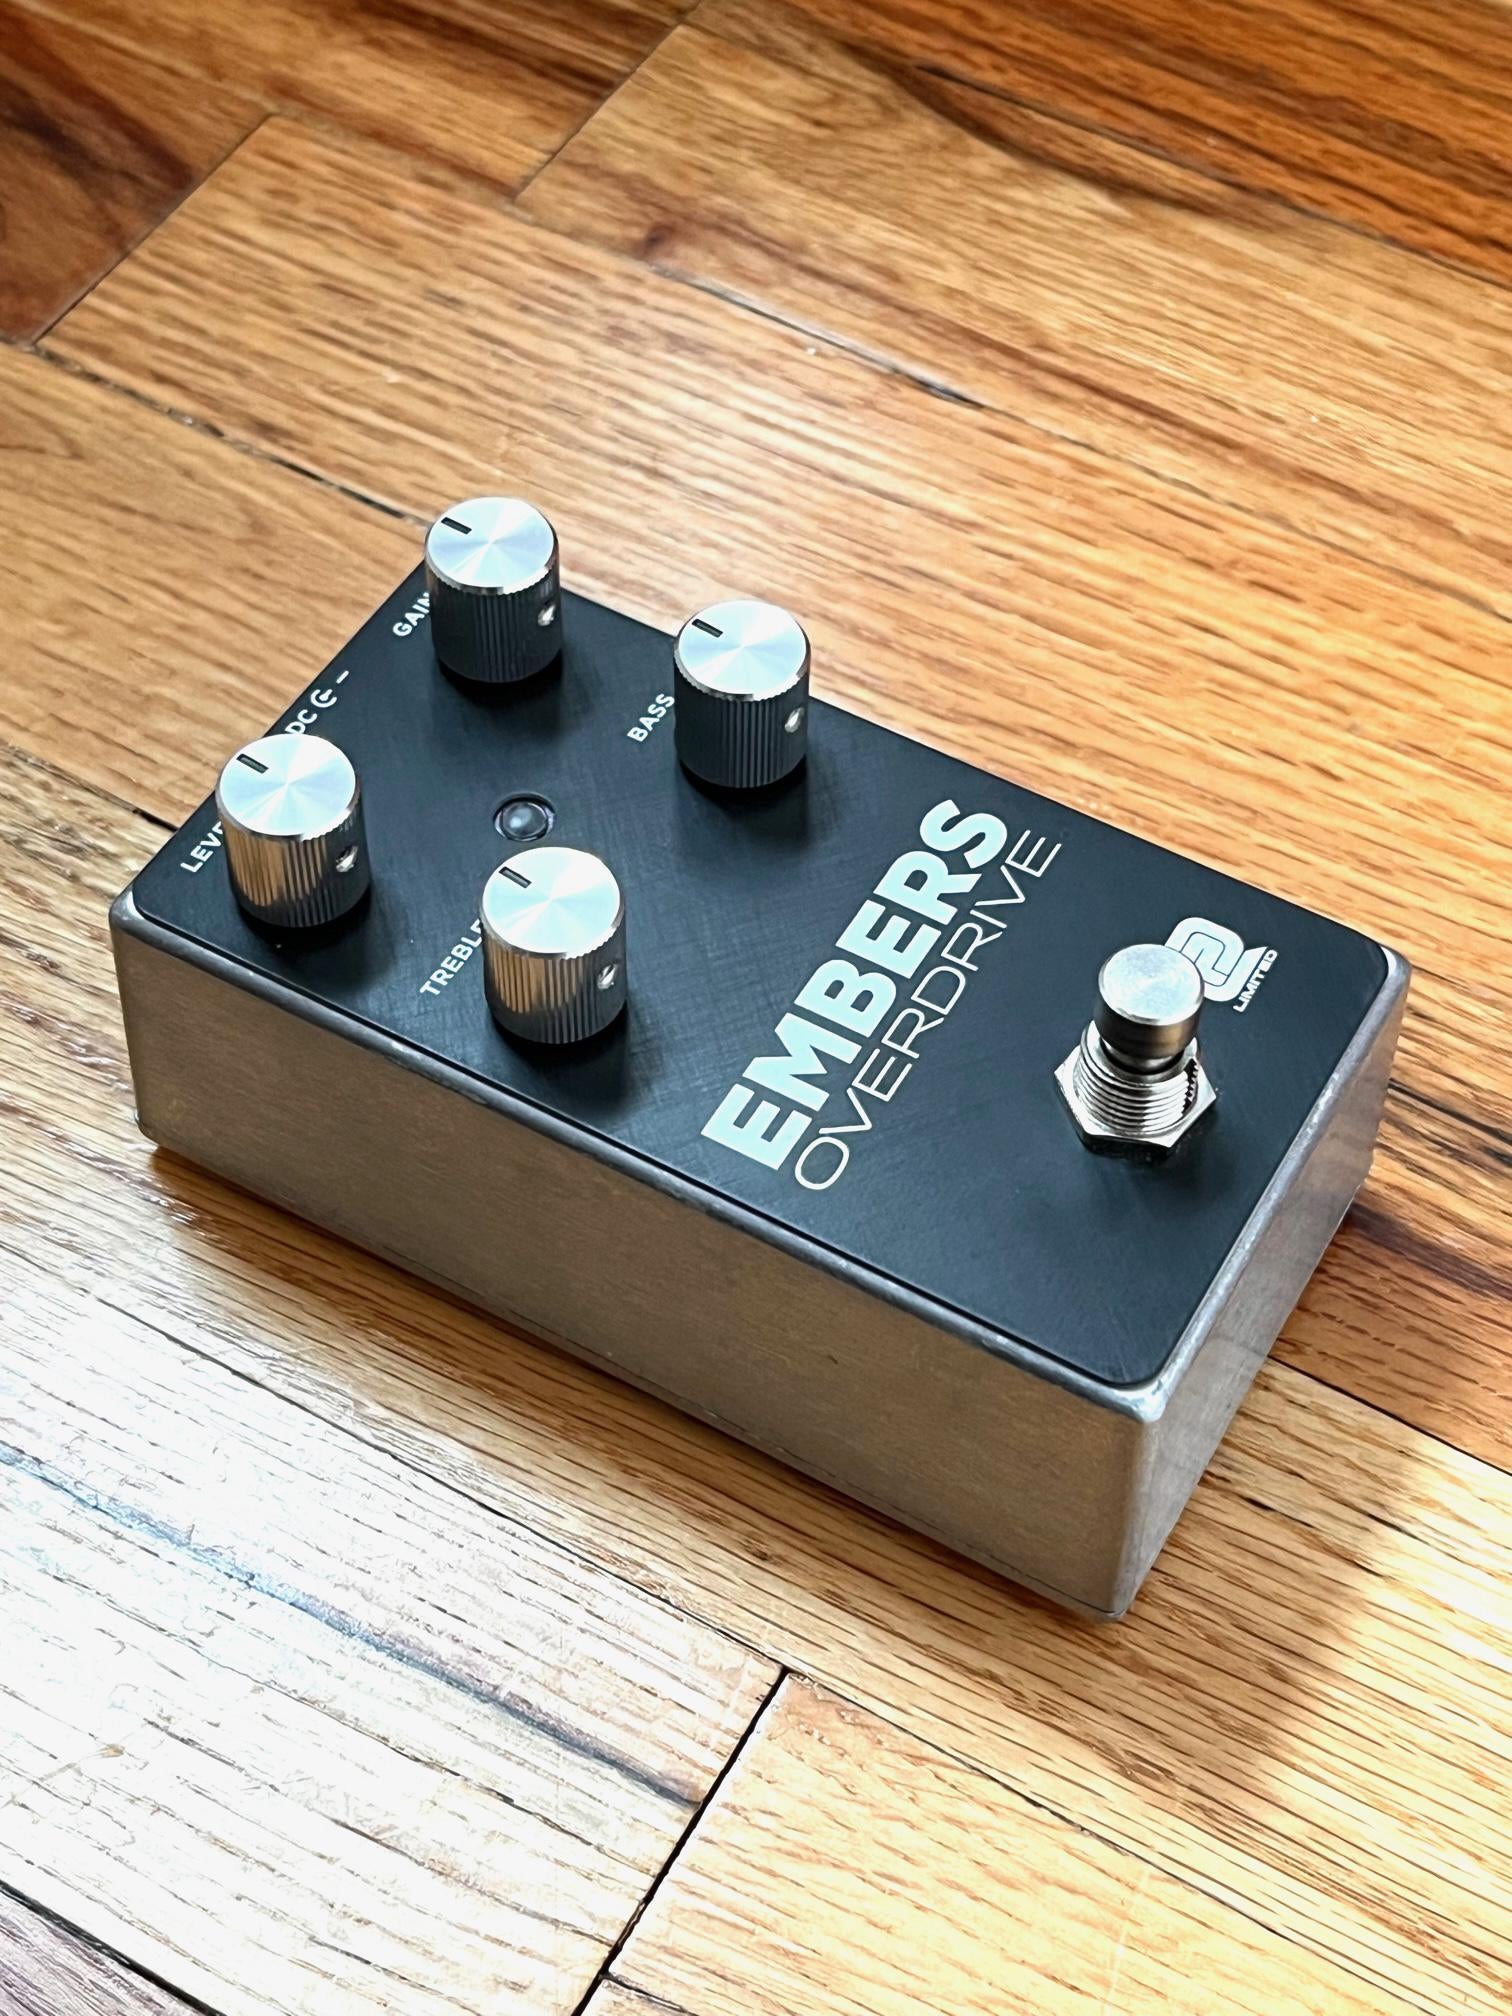 Used Bondi Effects Sick As v3 rare limted - Sweetwater's Gear Exchange